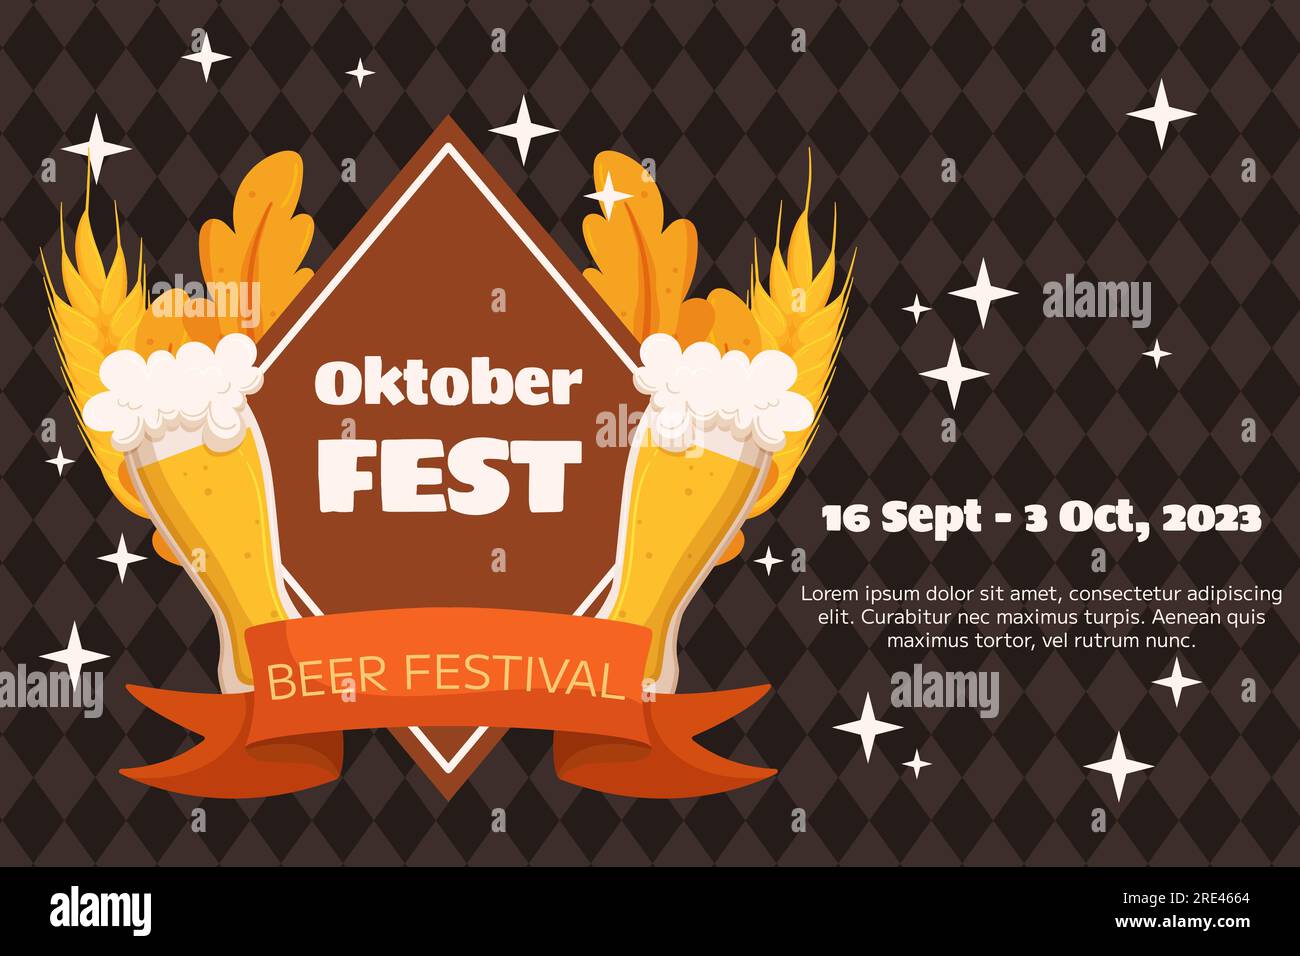 Oktoberfest German beer festival background. Design with glass of beer, wheat and leaves, banner ribbon. Rhombus pattern on back Stock Vector